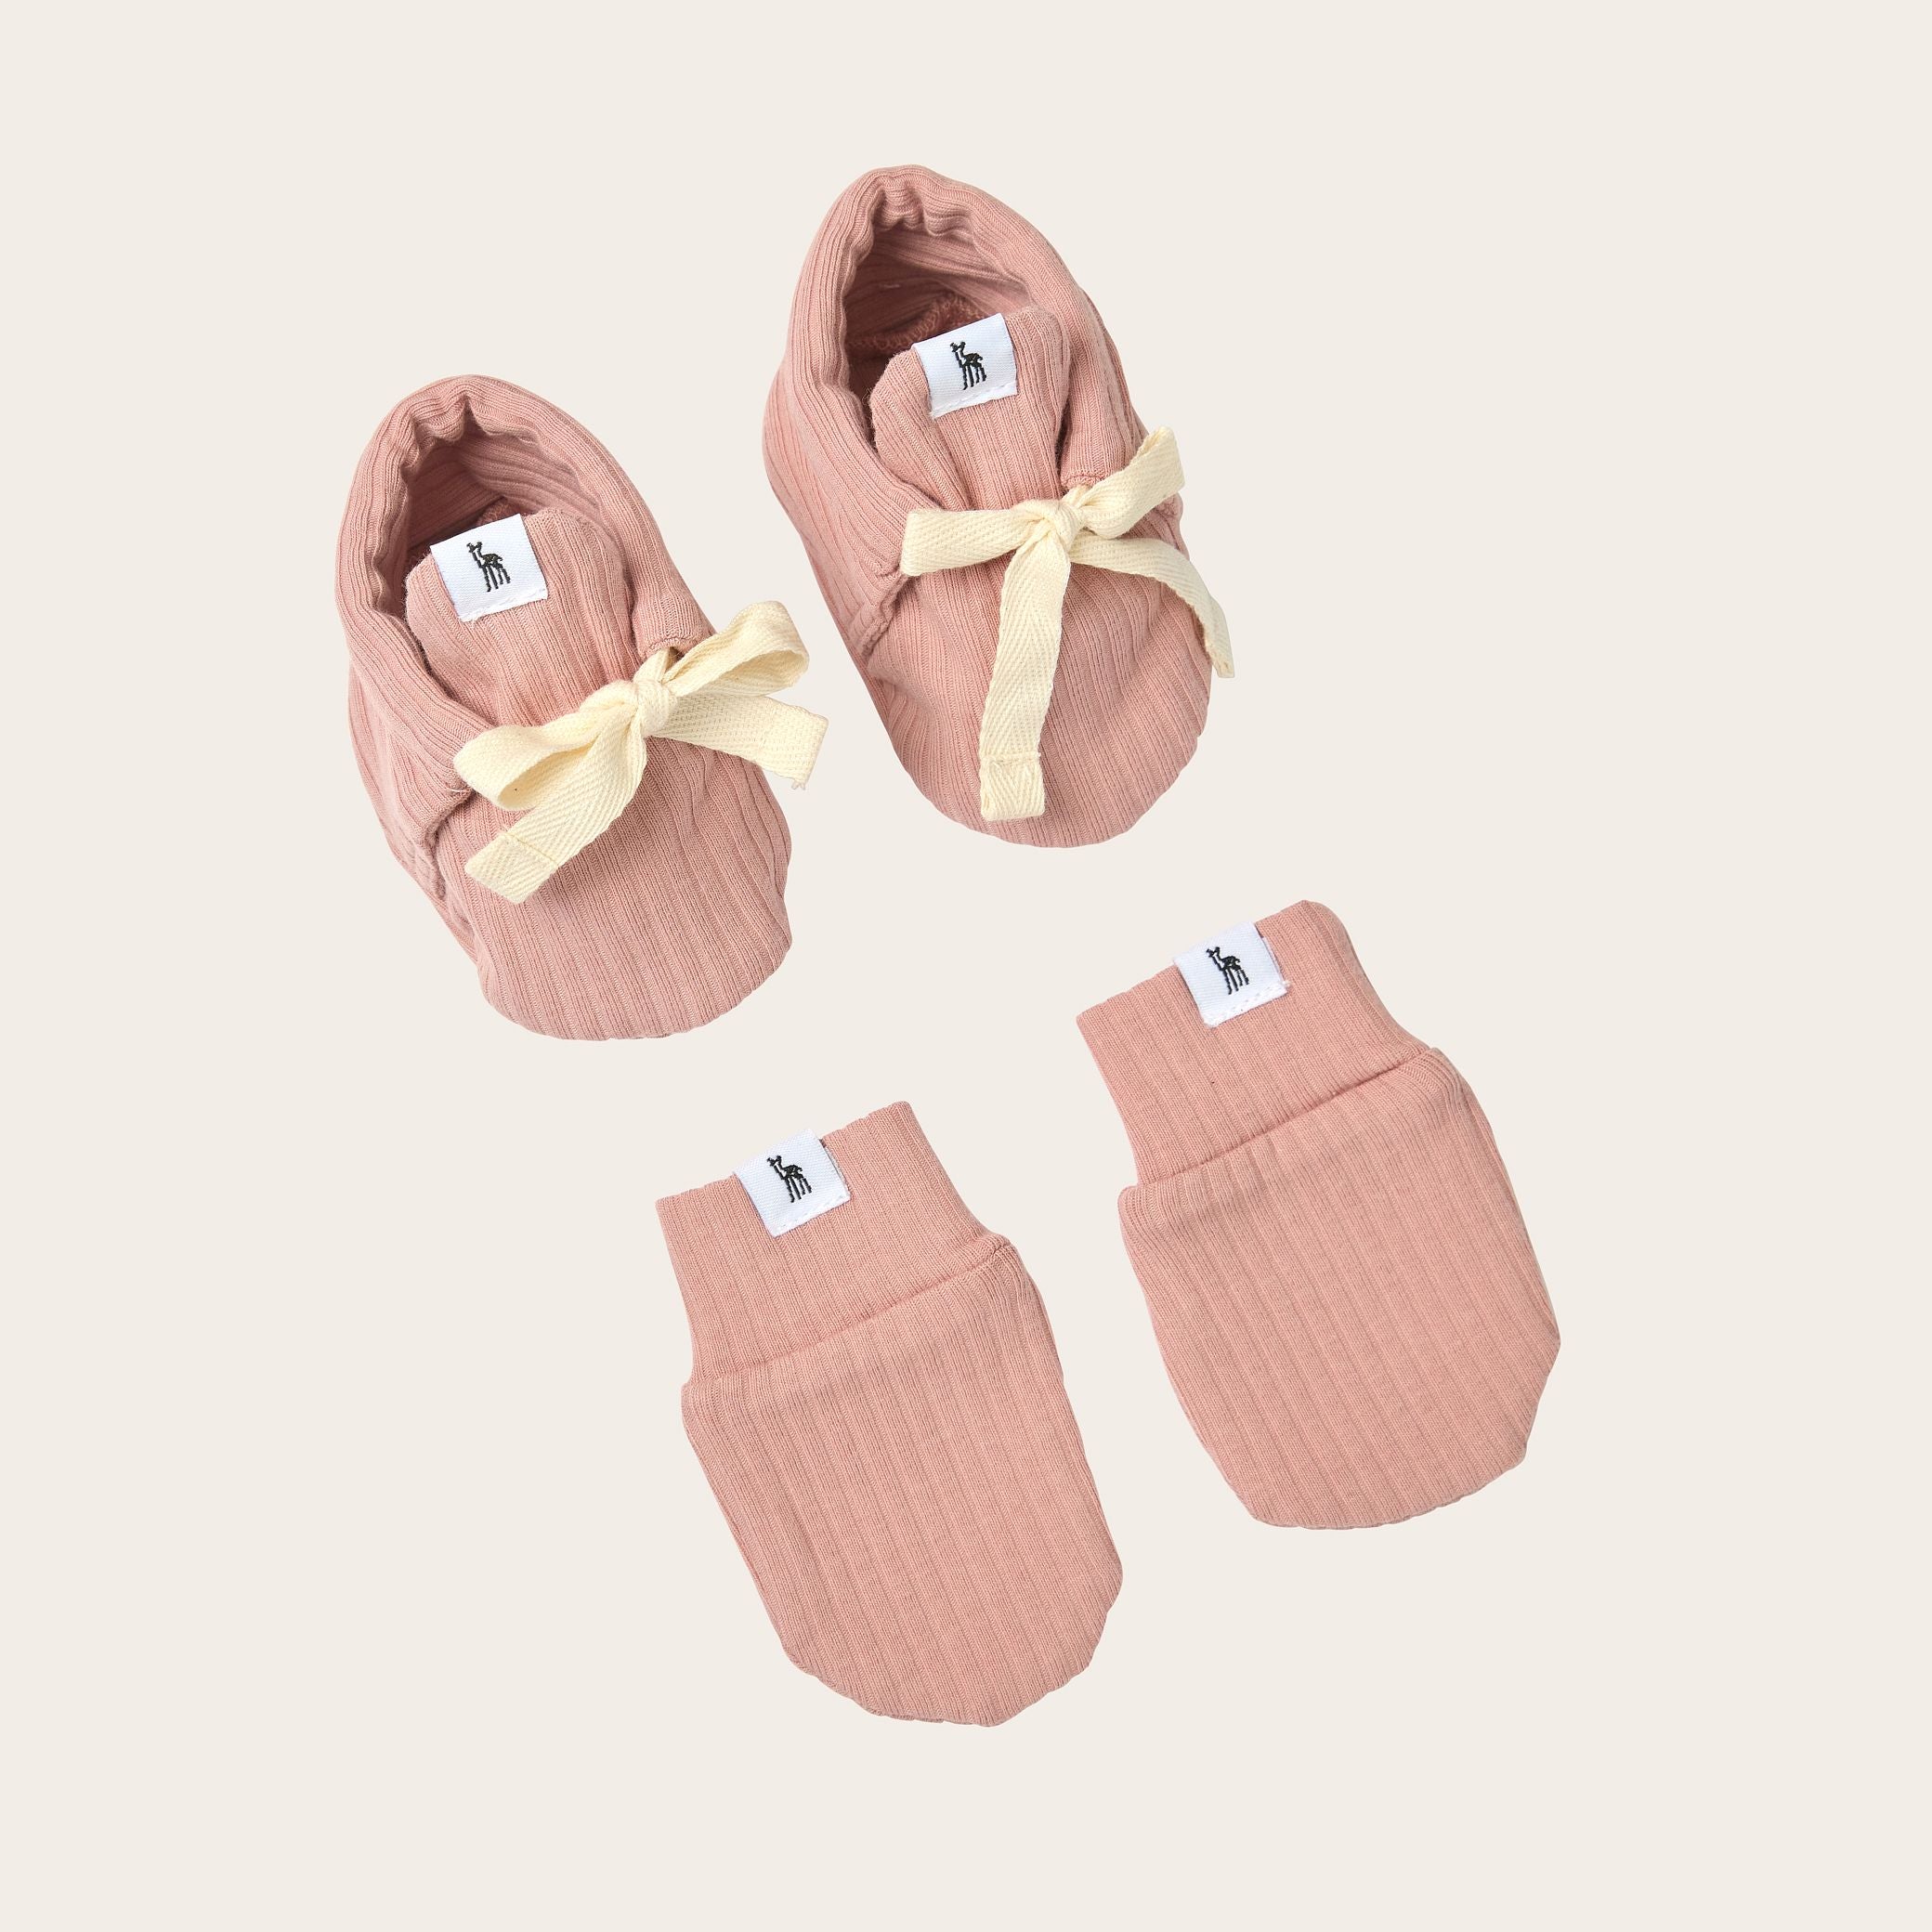 Ribbed Baby Mittens & Booties Bundle in Dusty Pink